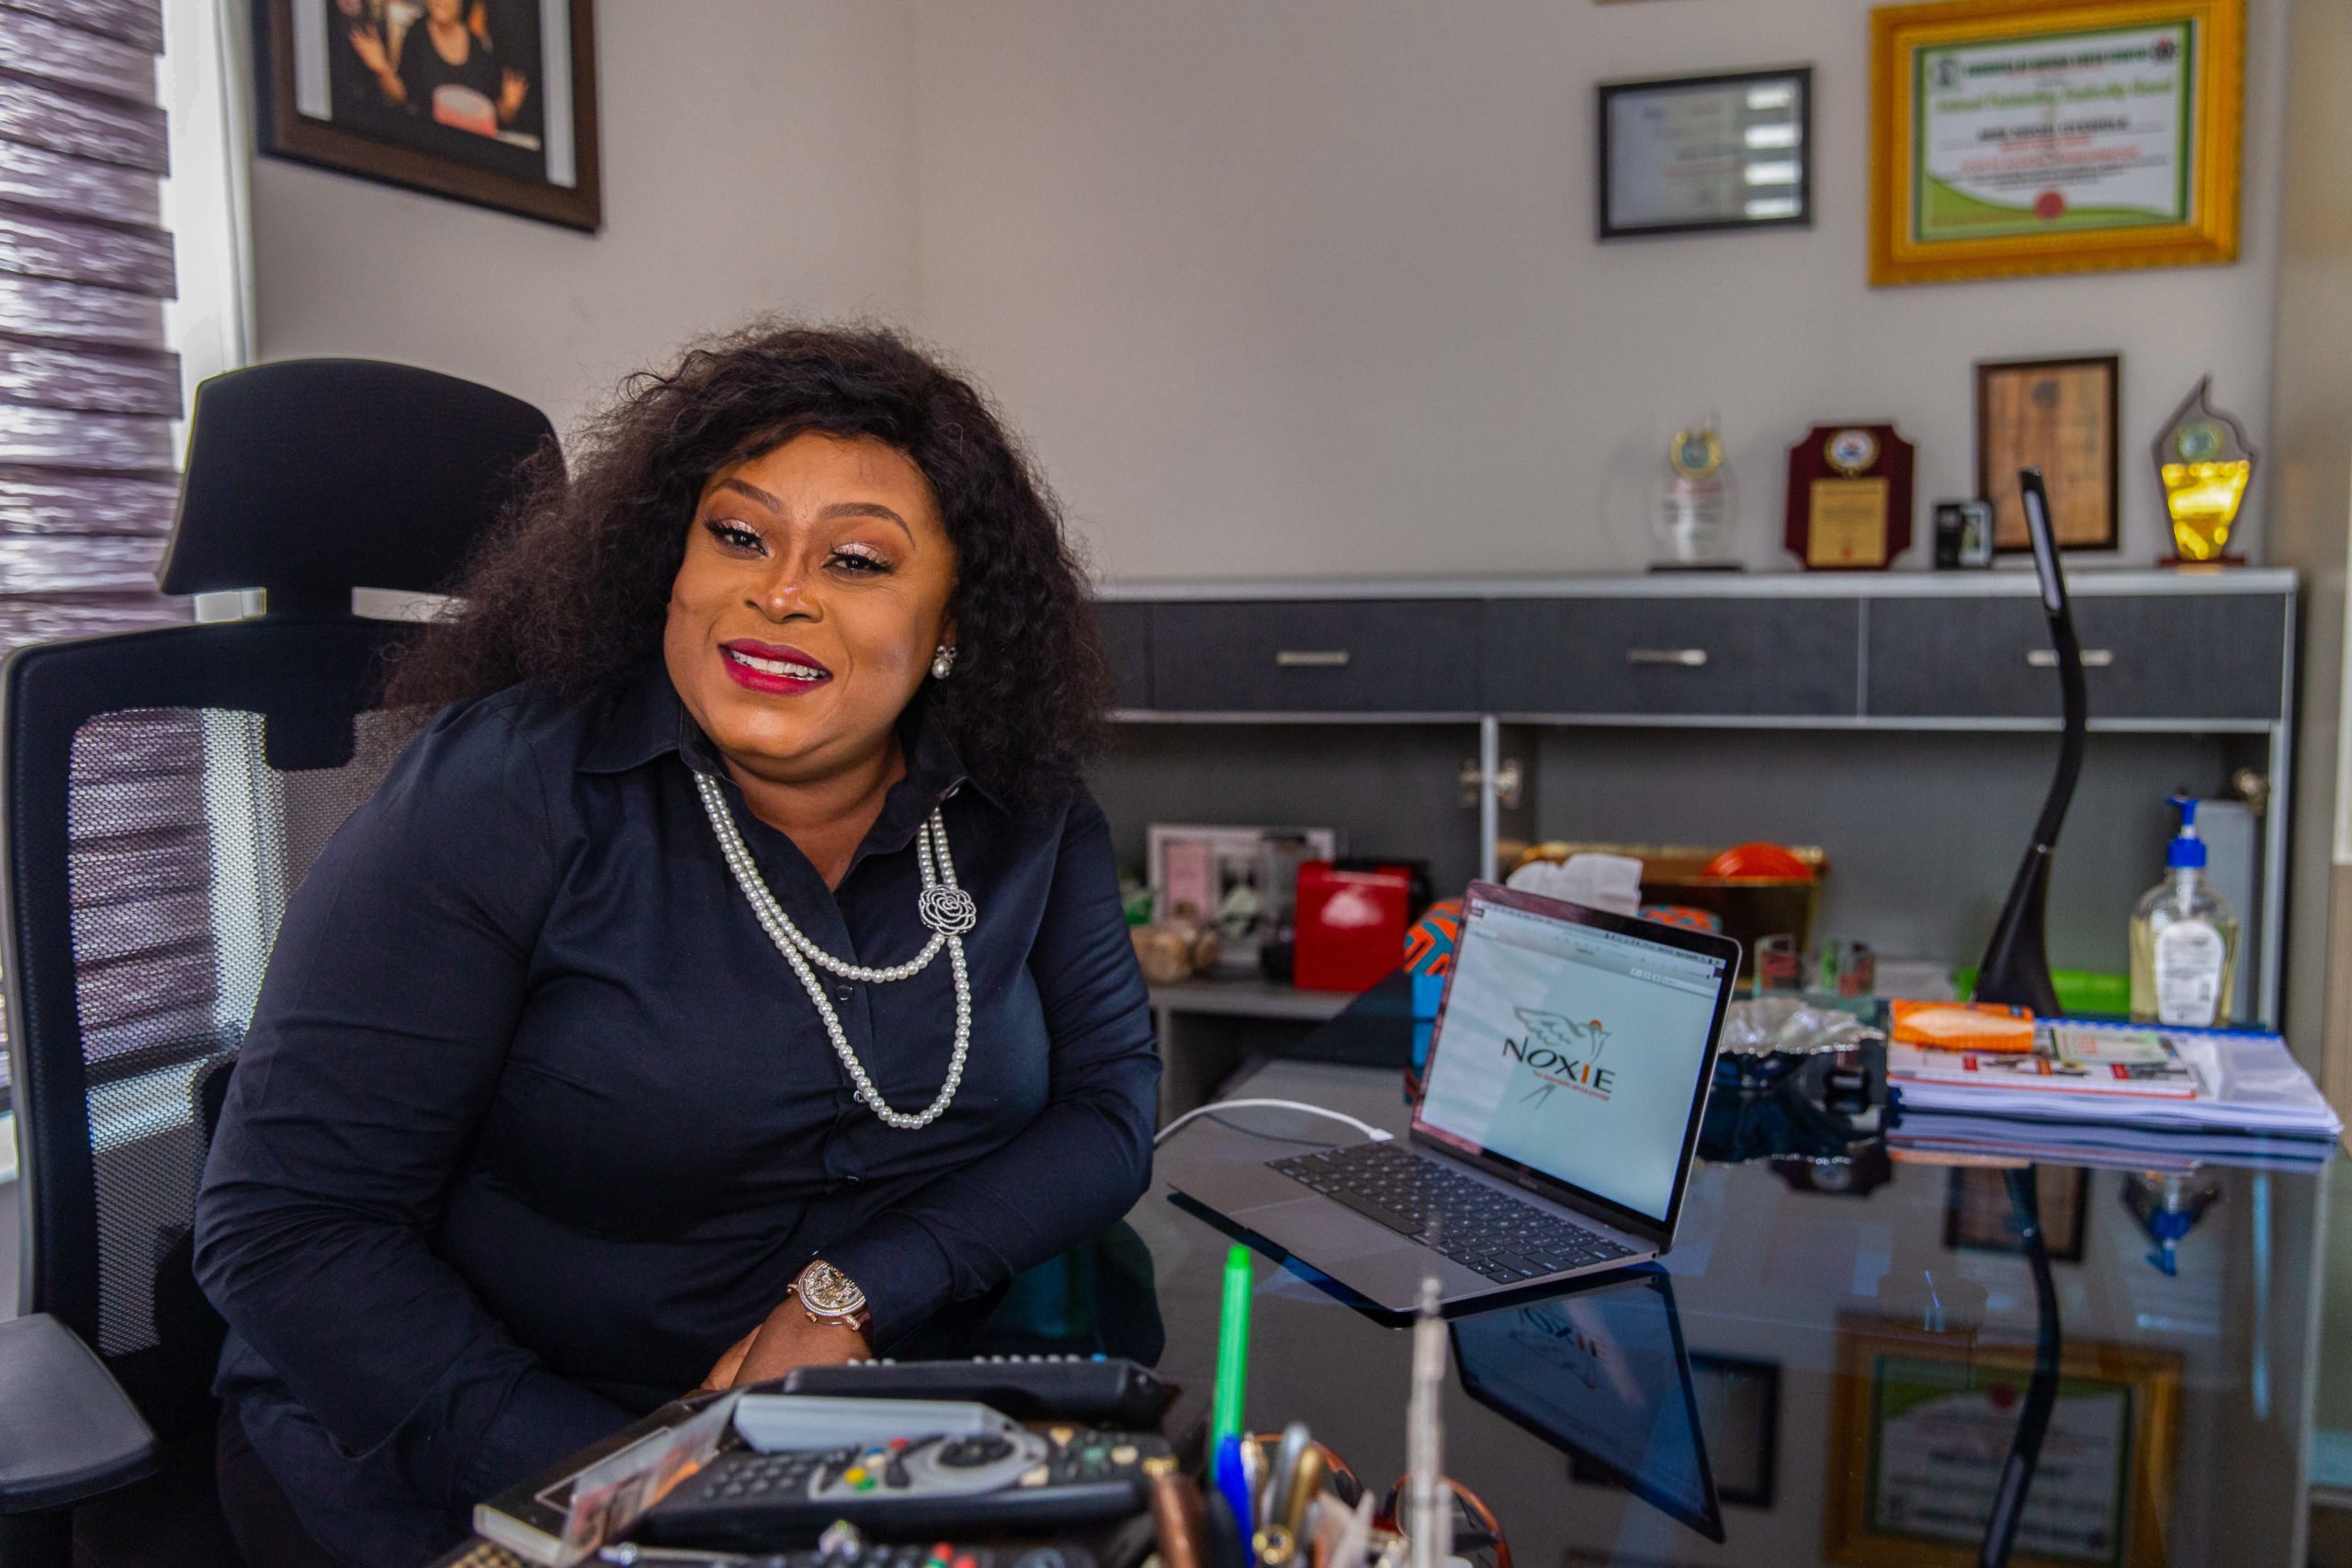 Ngozi Oyewole, the CEO of Noxie Limited, poses for a portrait at her office in Lagos, Nigeria on 27th January 2021. The Cherie Blair Foundation for Women continues to support women entrepreneurs across many African countries, including Nigeria, through their blended learning programmes, like Road to Growth and HerVenture.